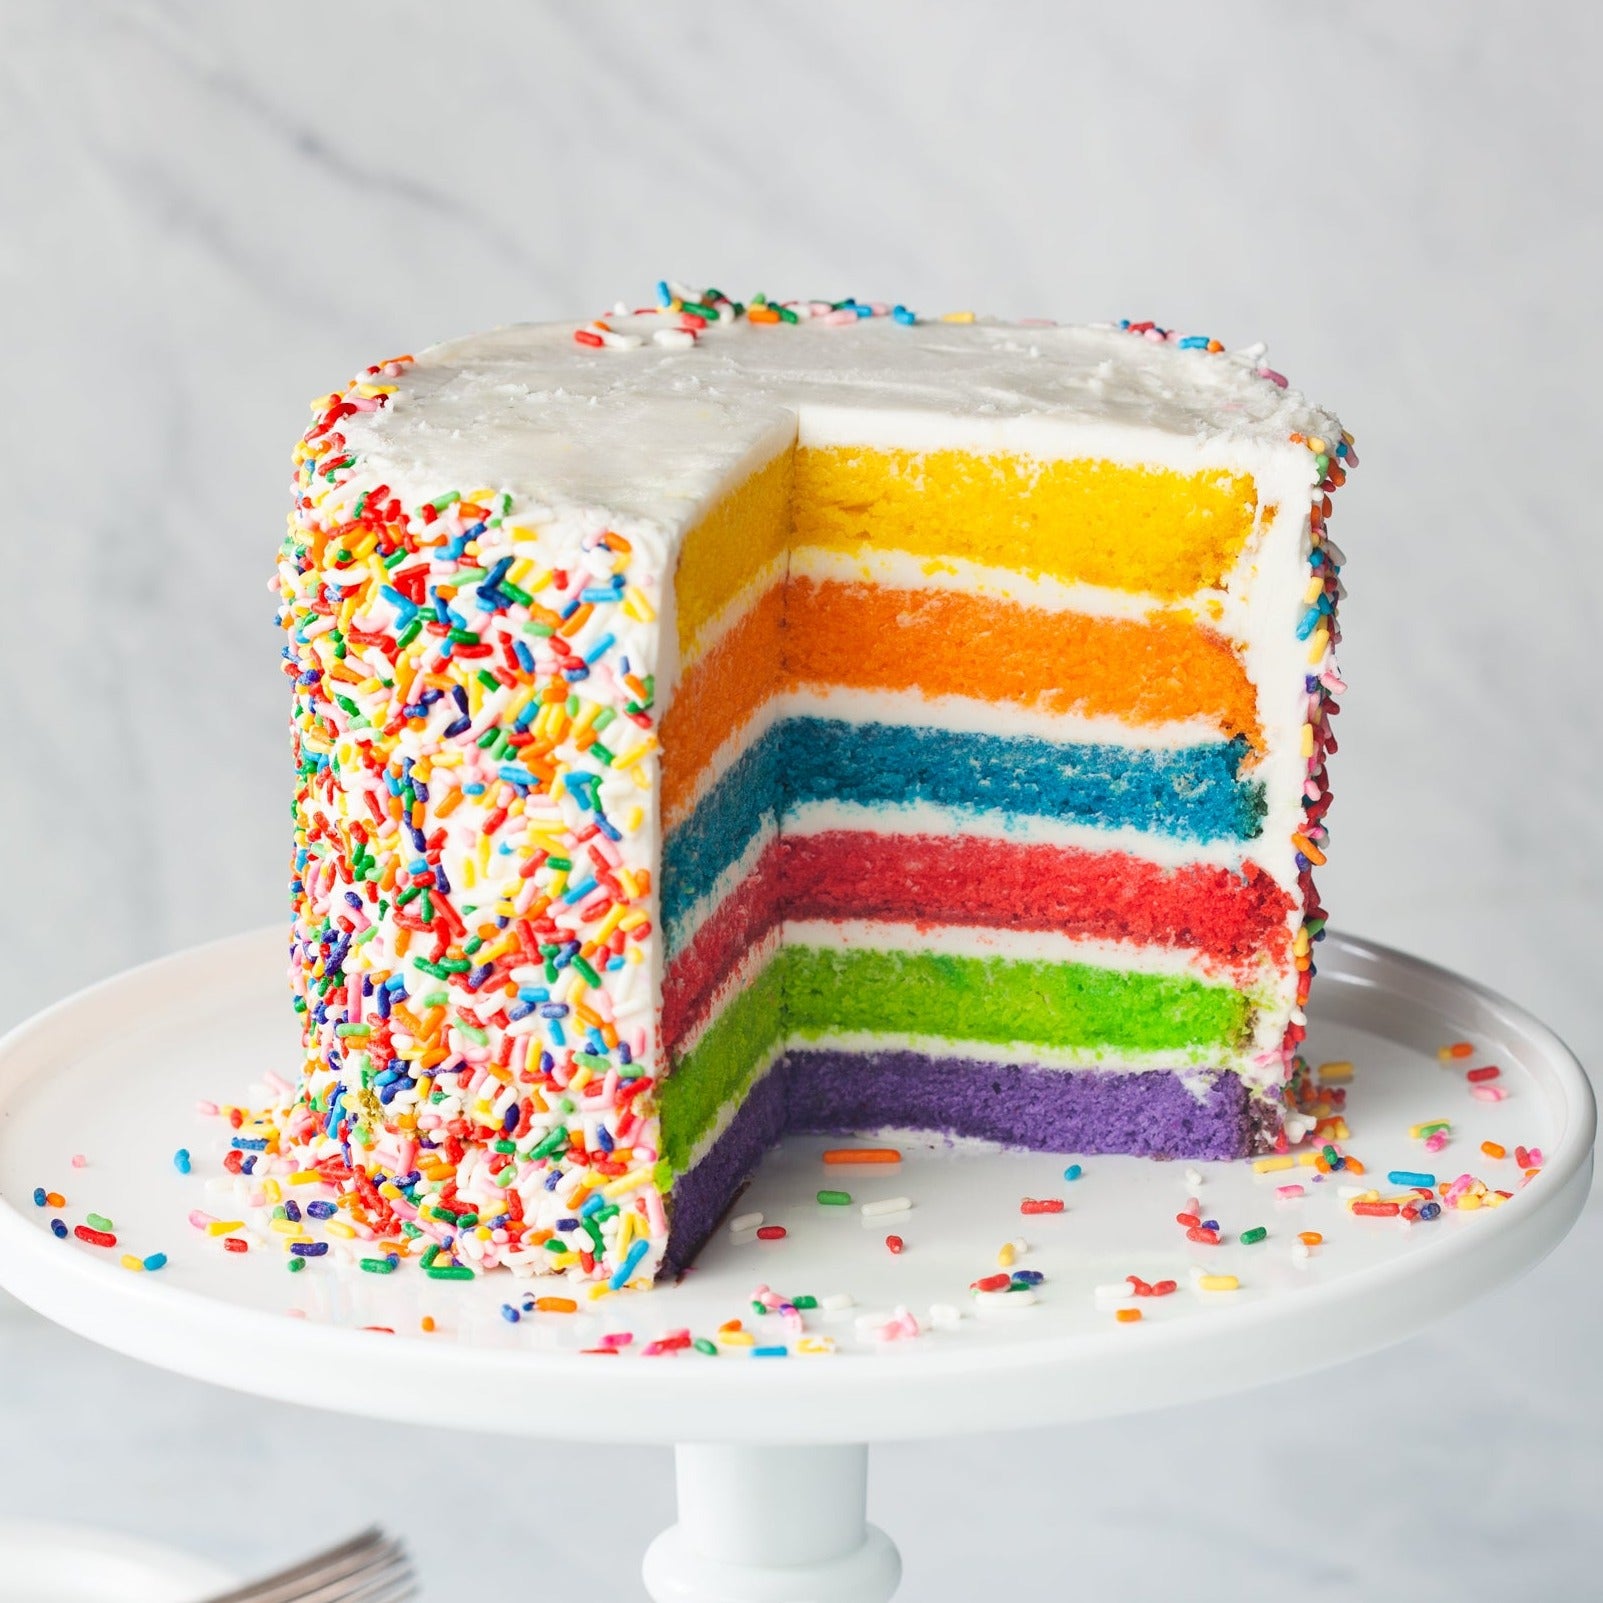 Rainbow cake with buttercream icing and sprinkles